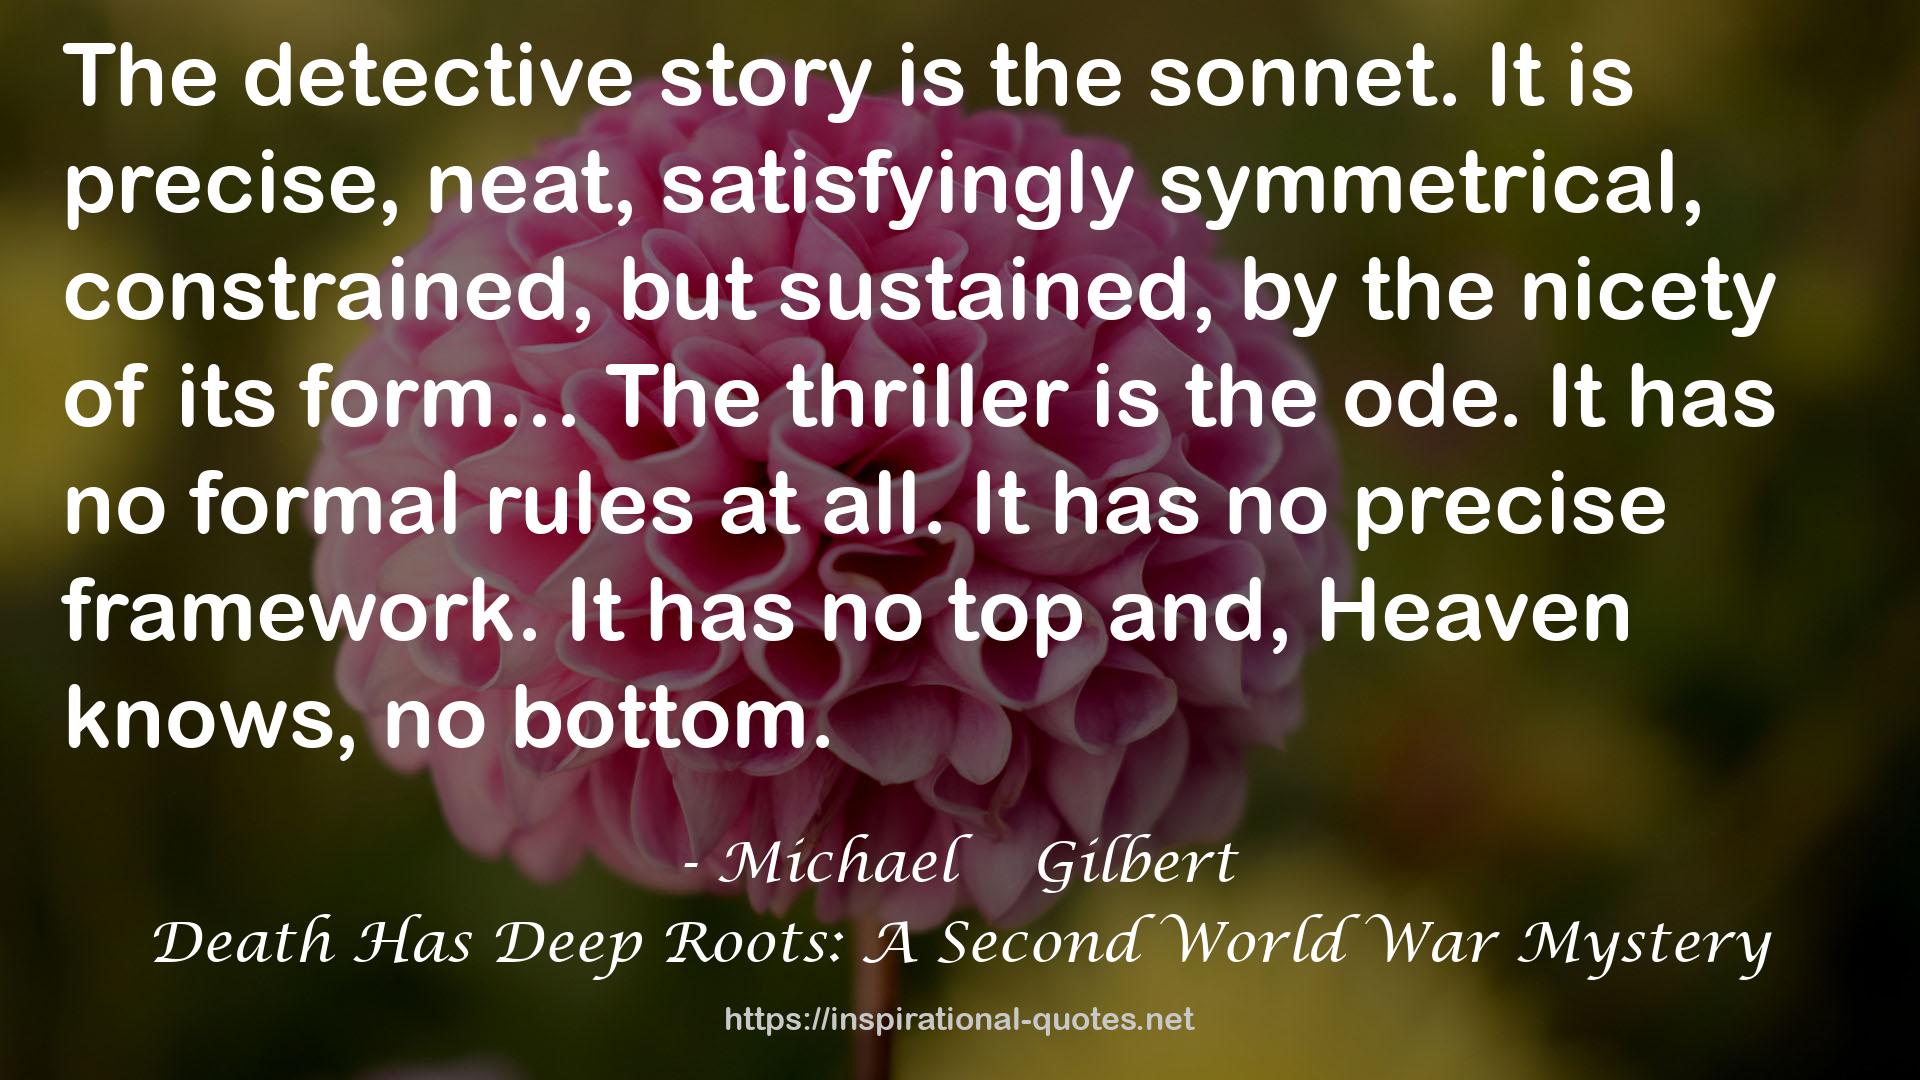 Death Has Deep Roots: A Second World War Mystery QUOTES